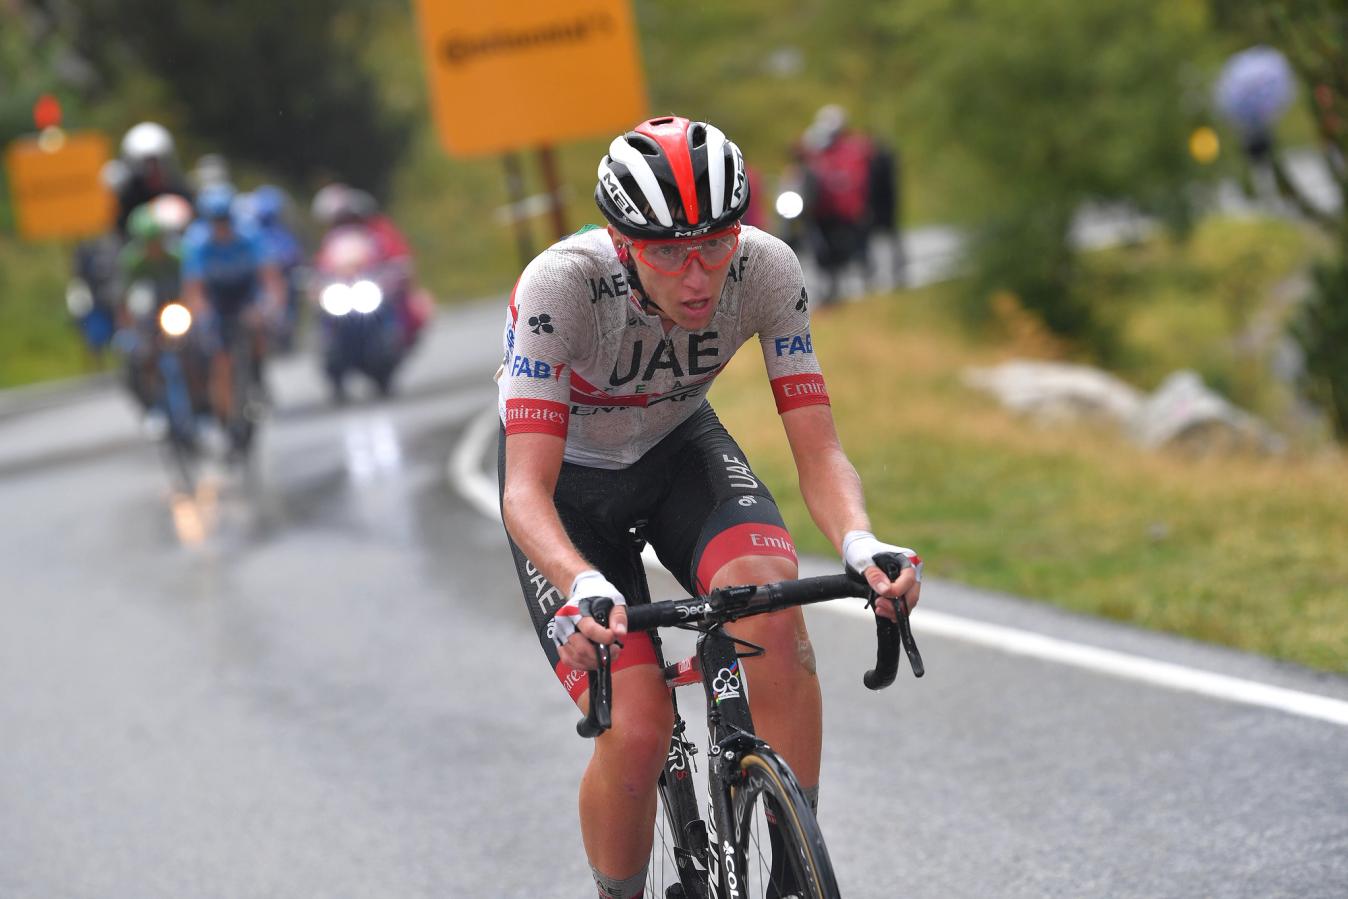 Tadej Pogačar made his name in the Grand Tours with three stage wins and third place overall at the 2019 Vuelta a España